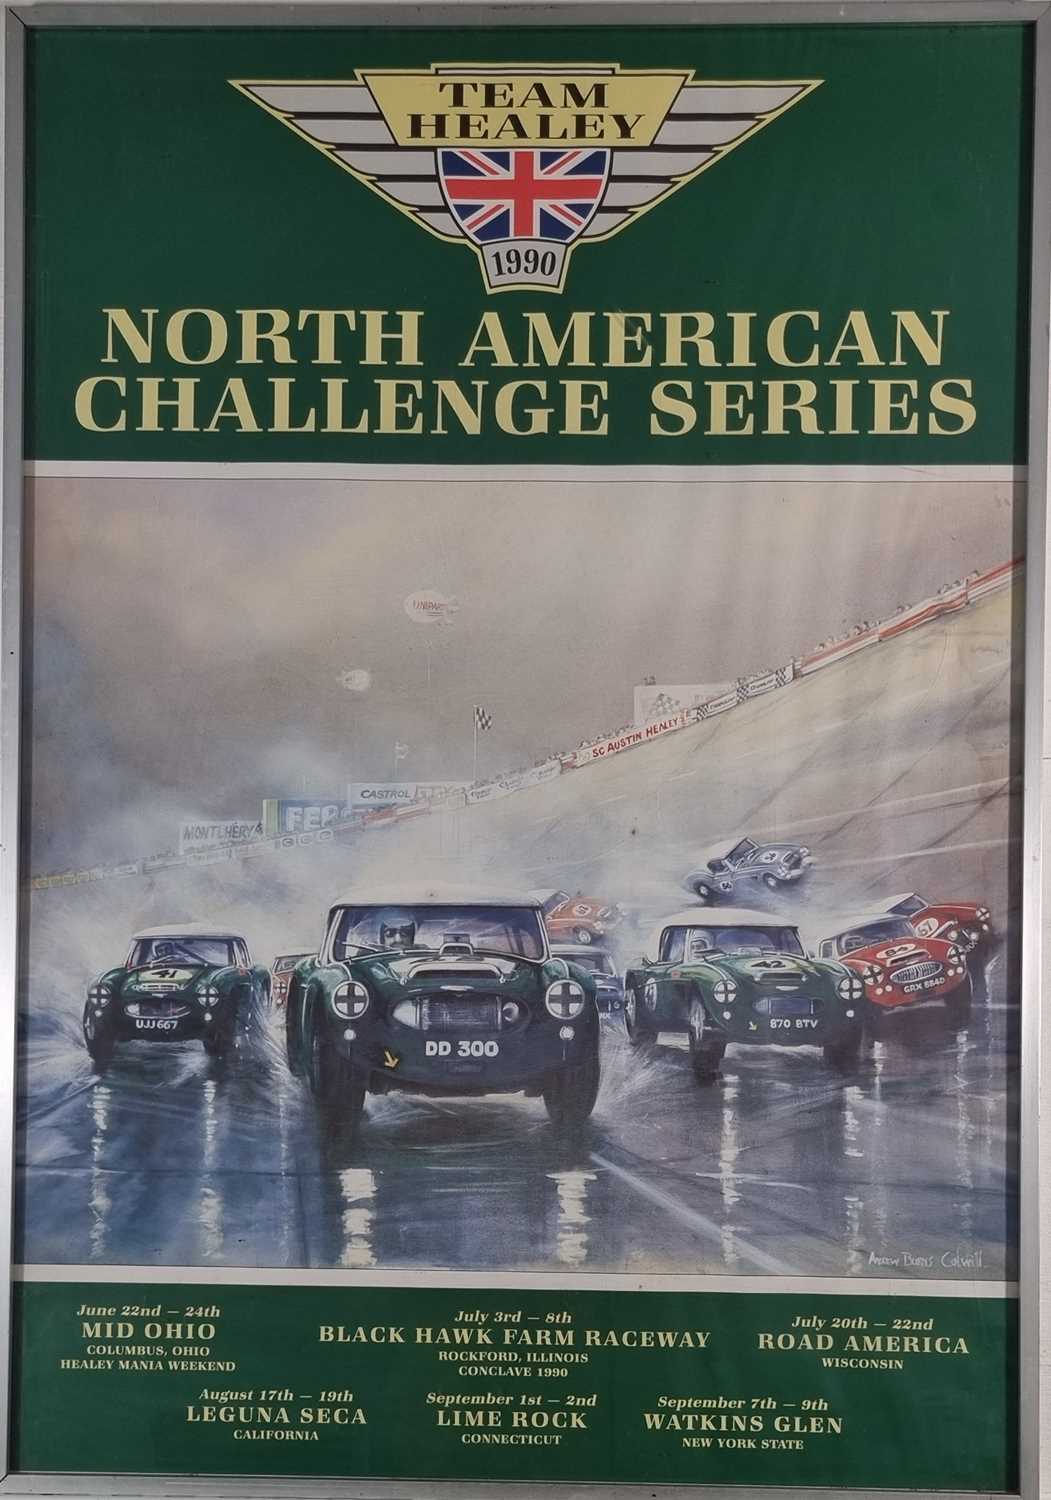 20th Century Poster for the North American Challenge Series, Team Healey 1990, 33.75" x 23.25" (85cm